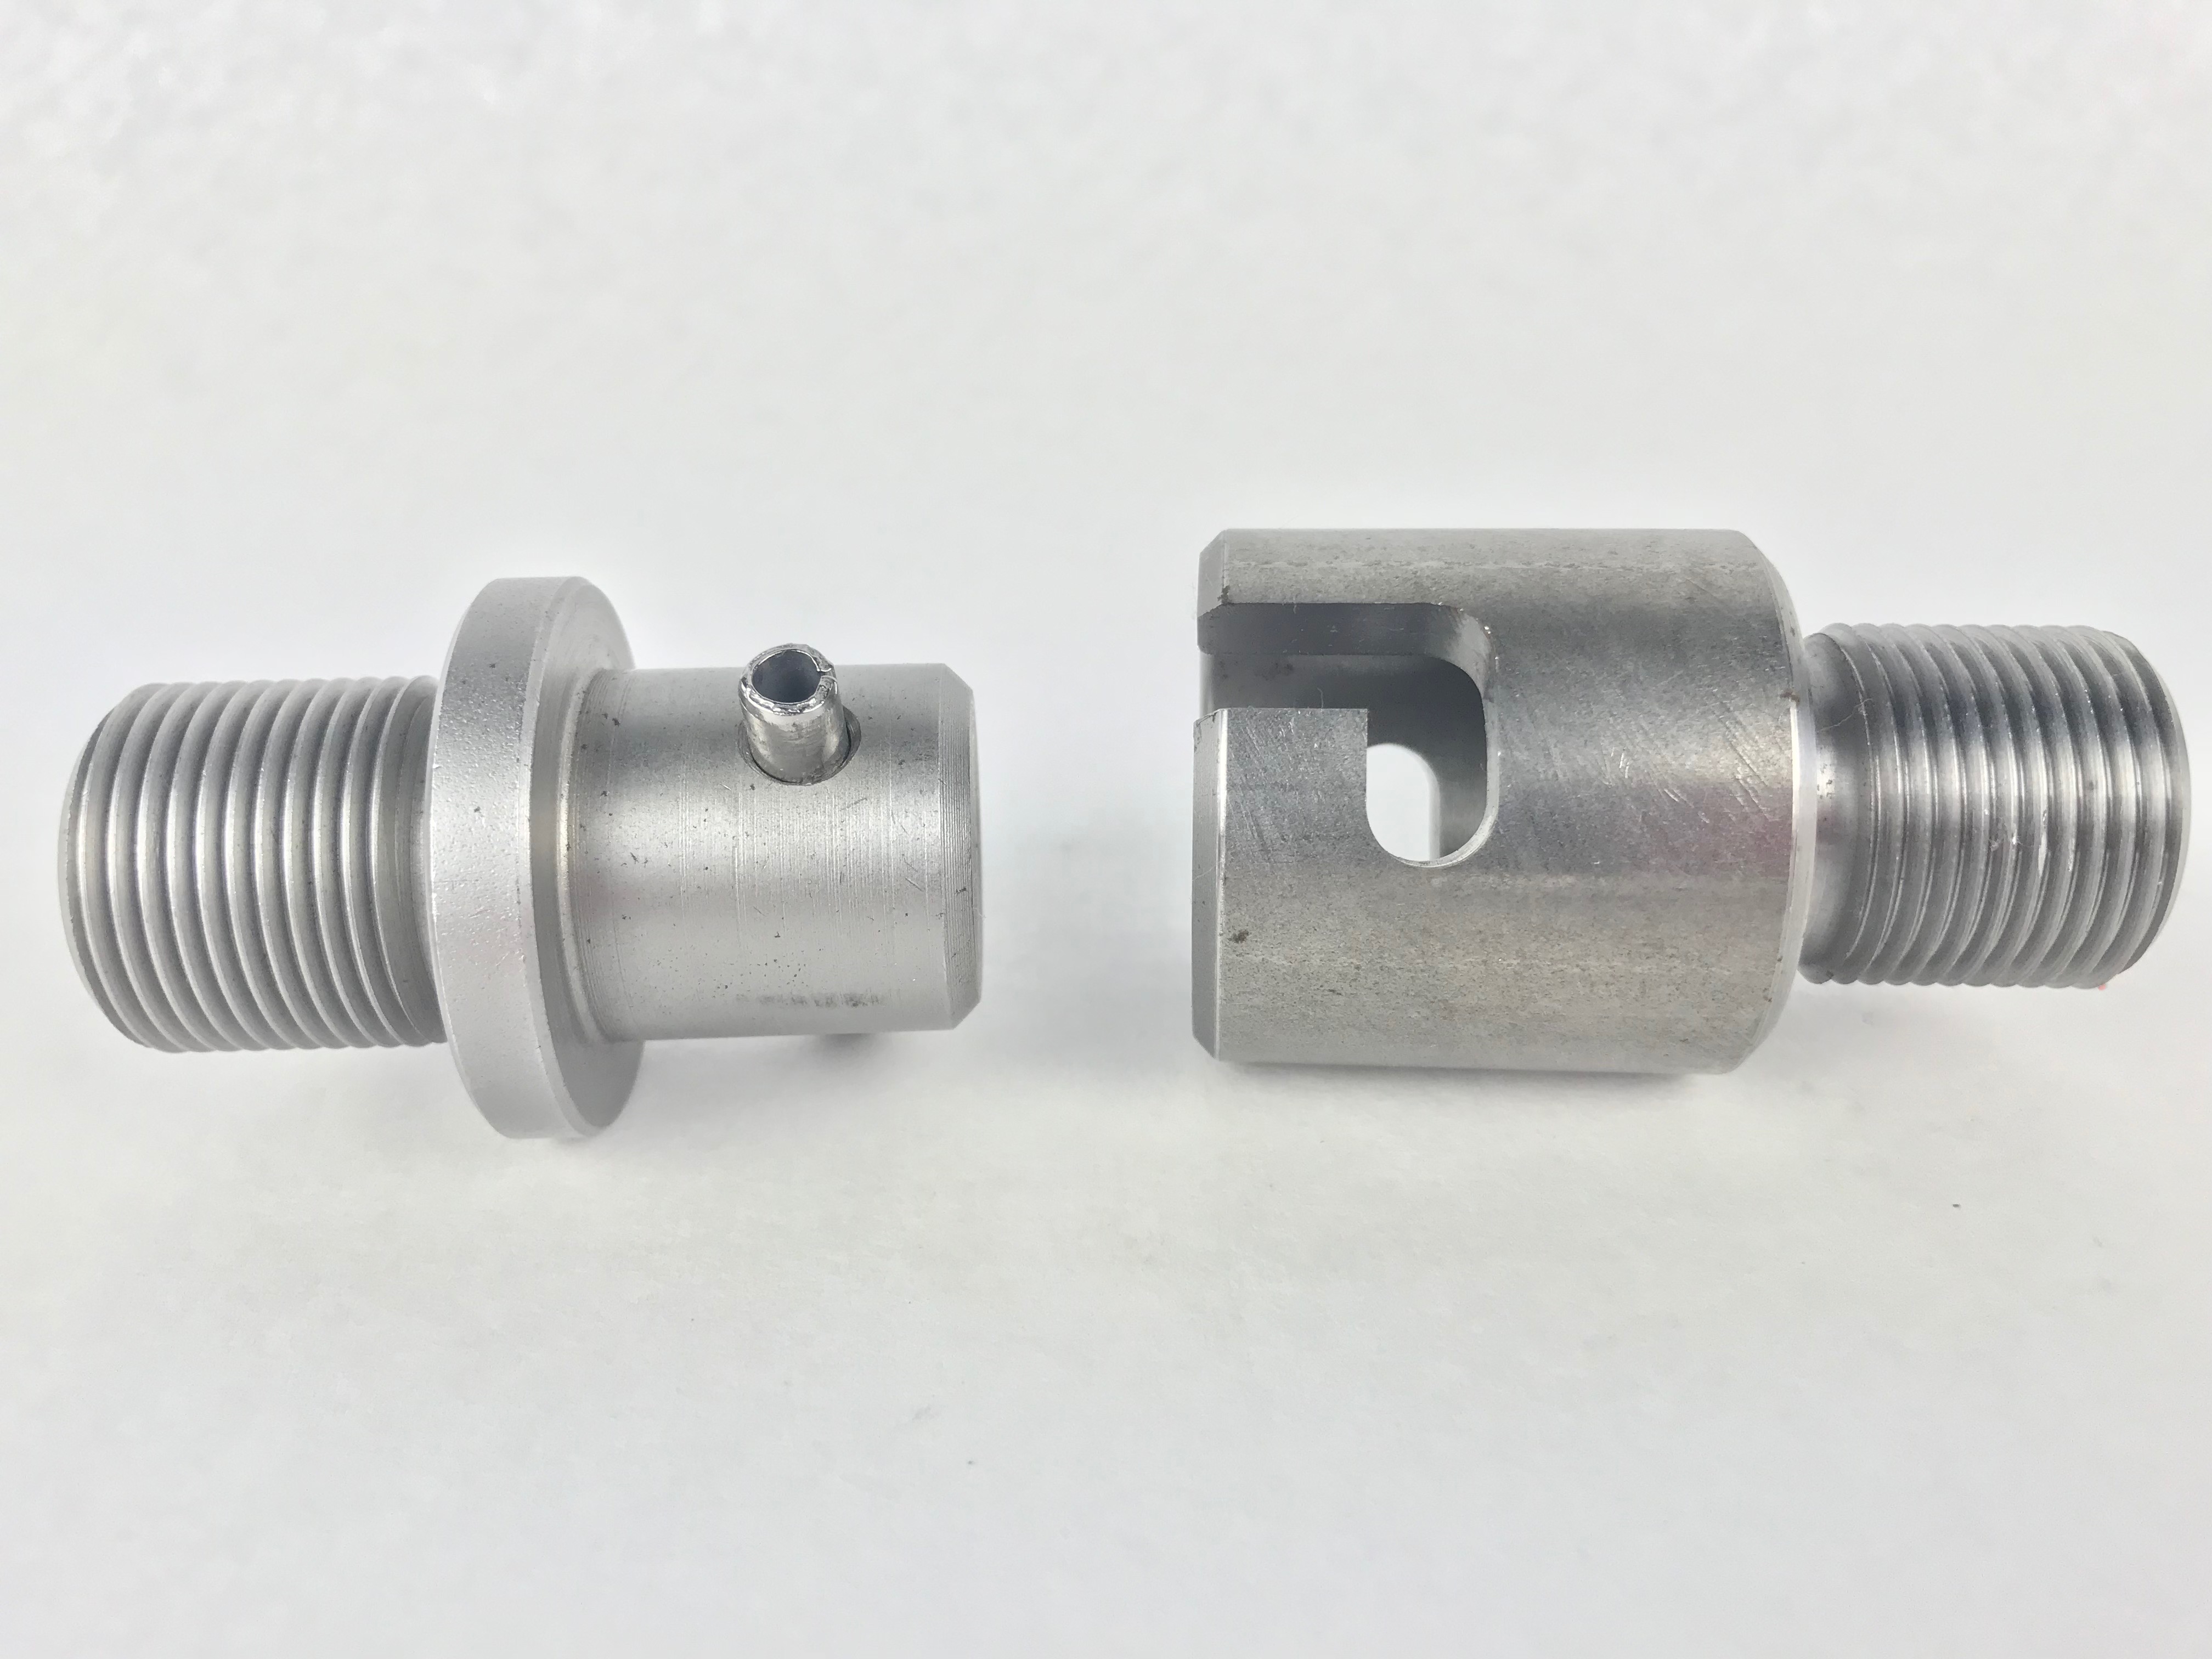 The Huth Swage PKDS-823 and PKDF-818 adapters allow you to connect your BendPak®️ machines to the Huth Swage end-forming tooling. The parts are shown on a white background. They are silver-colored and round. 